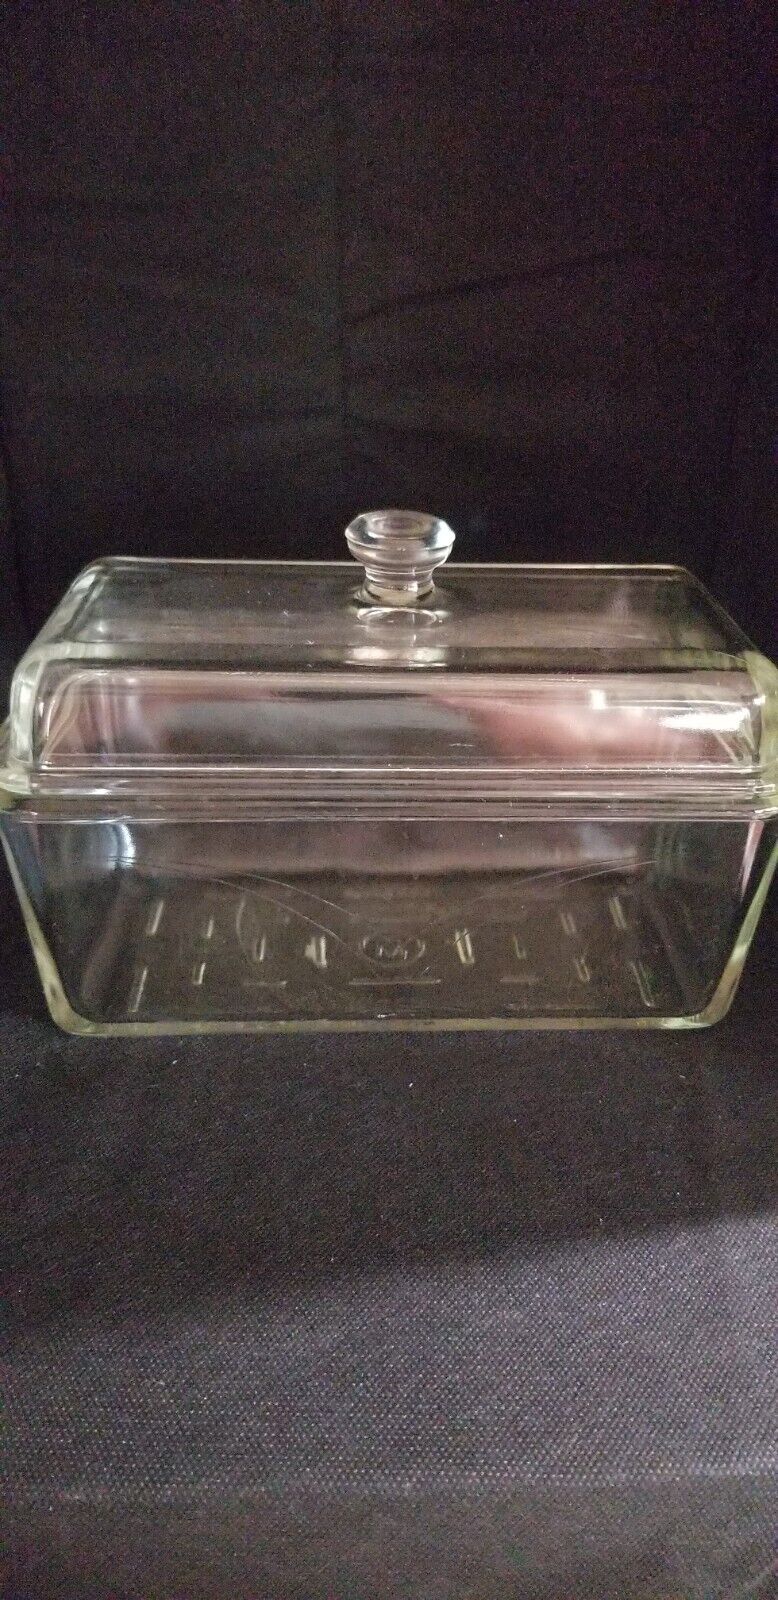 Vintage Large Westing House Pyrex Refrigerator Lidded Storage Container.